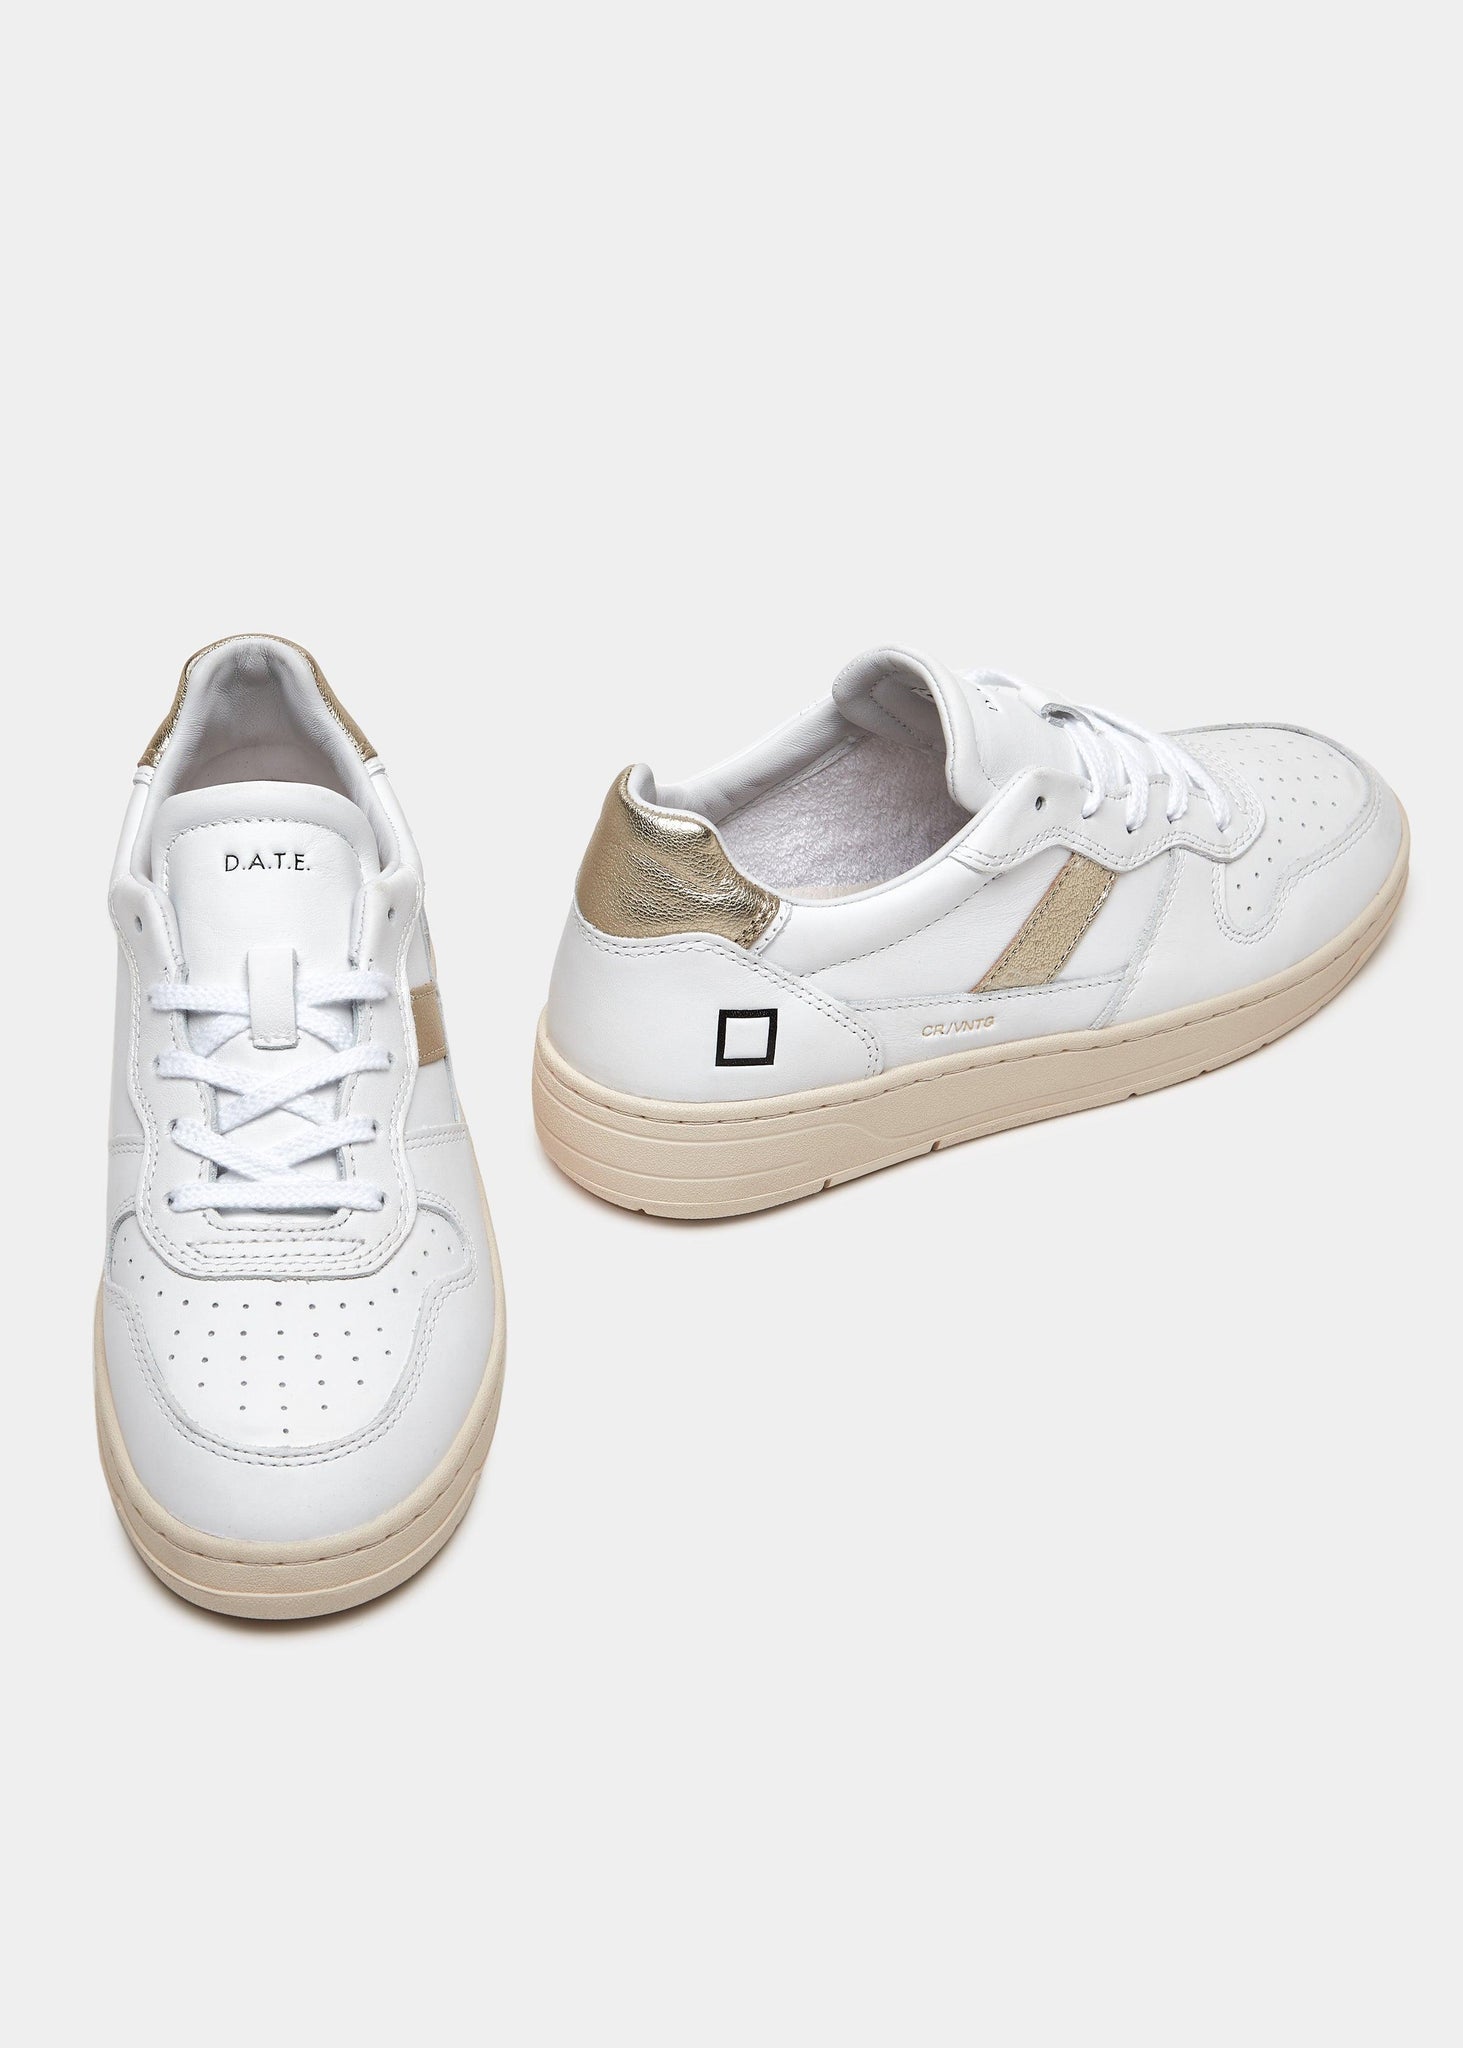 D.A.T.E Court 2.0 White & Gold trainer - MADE THE EDIT